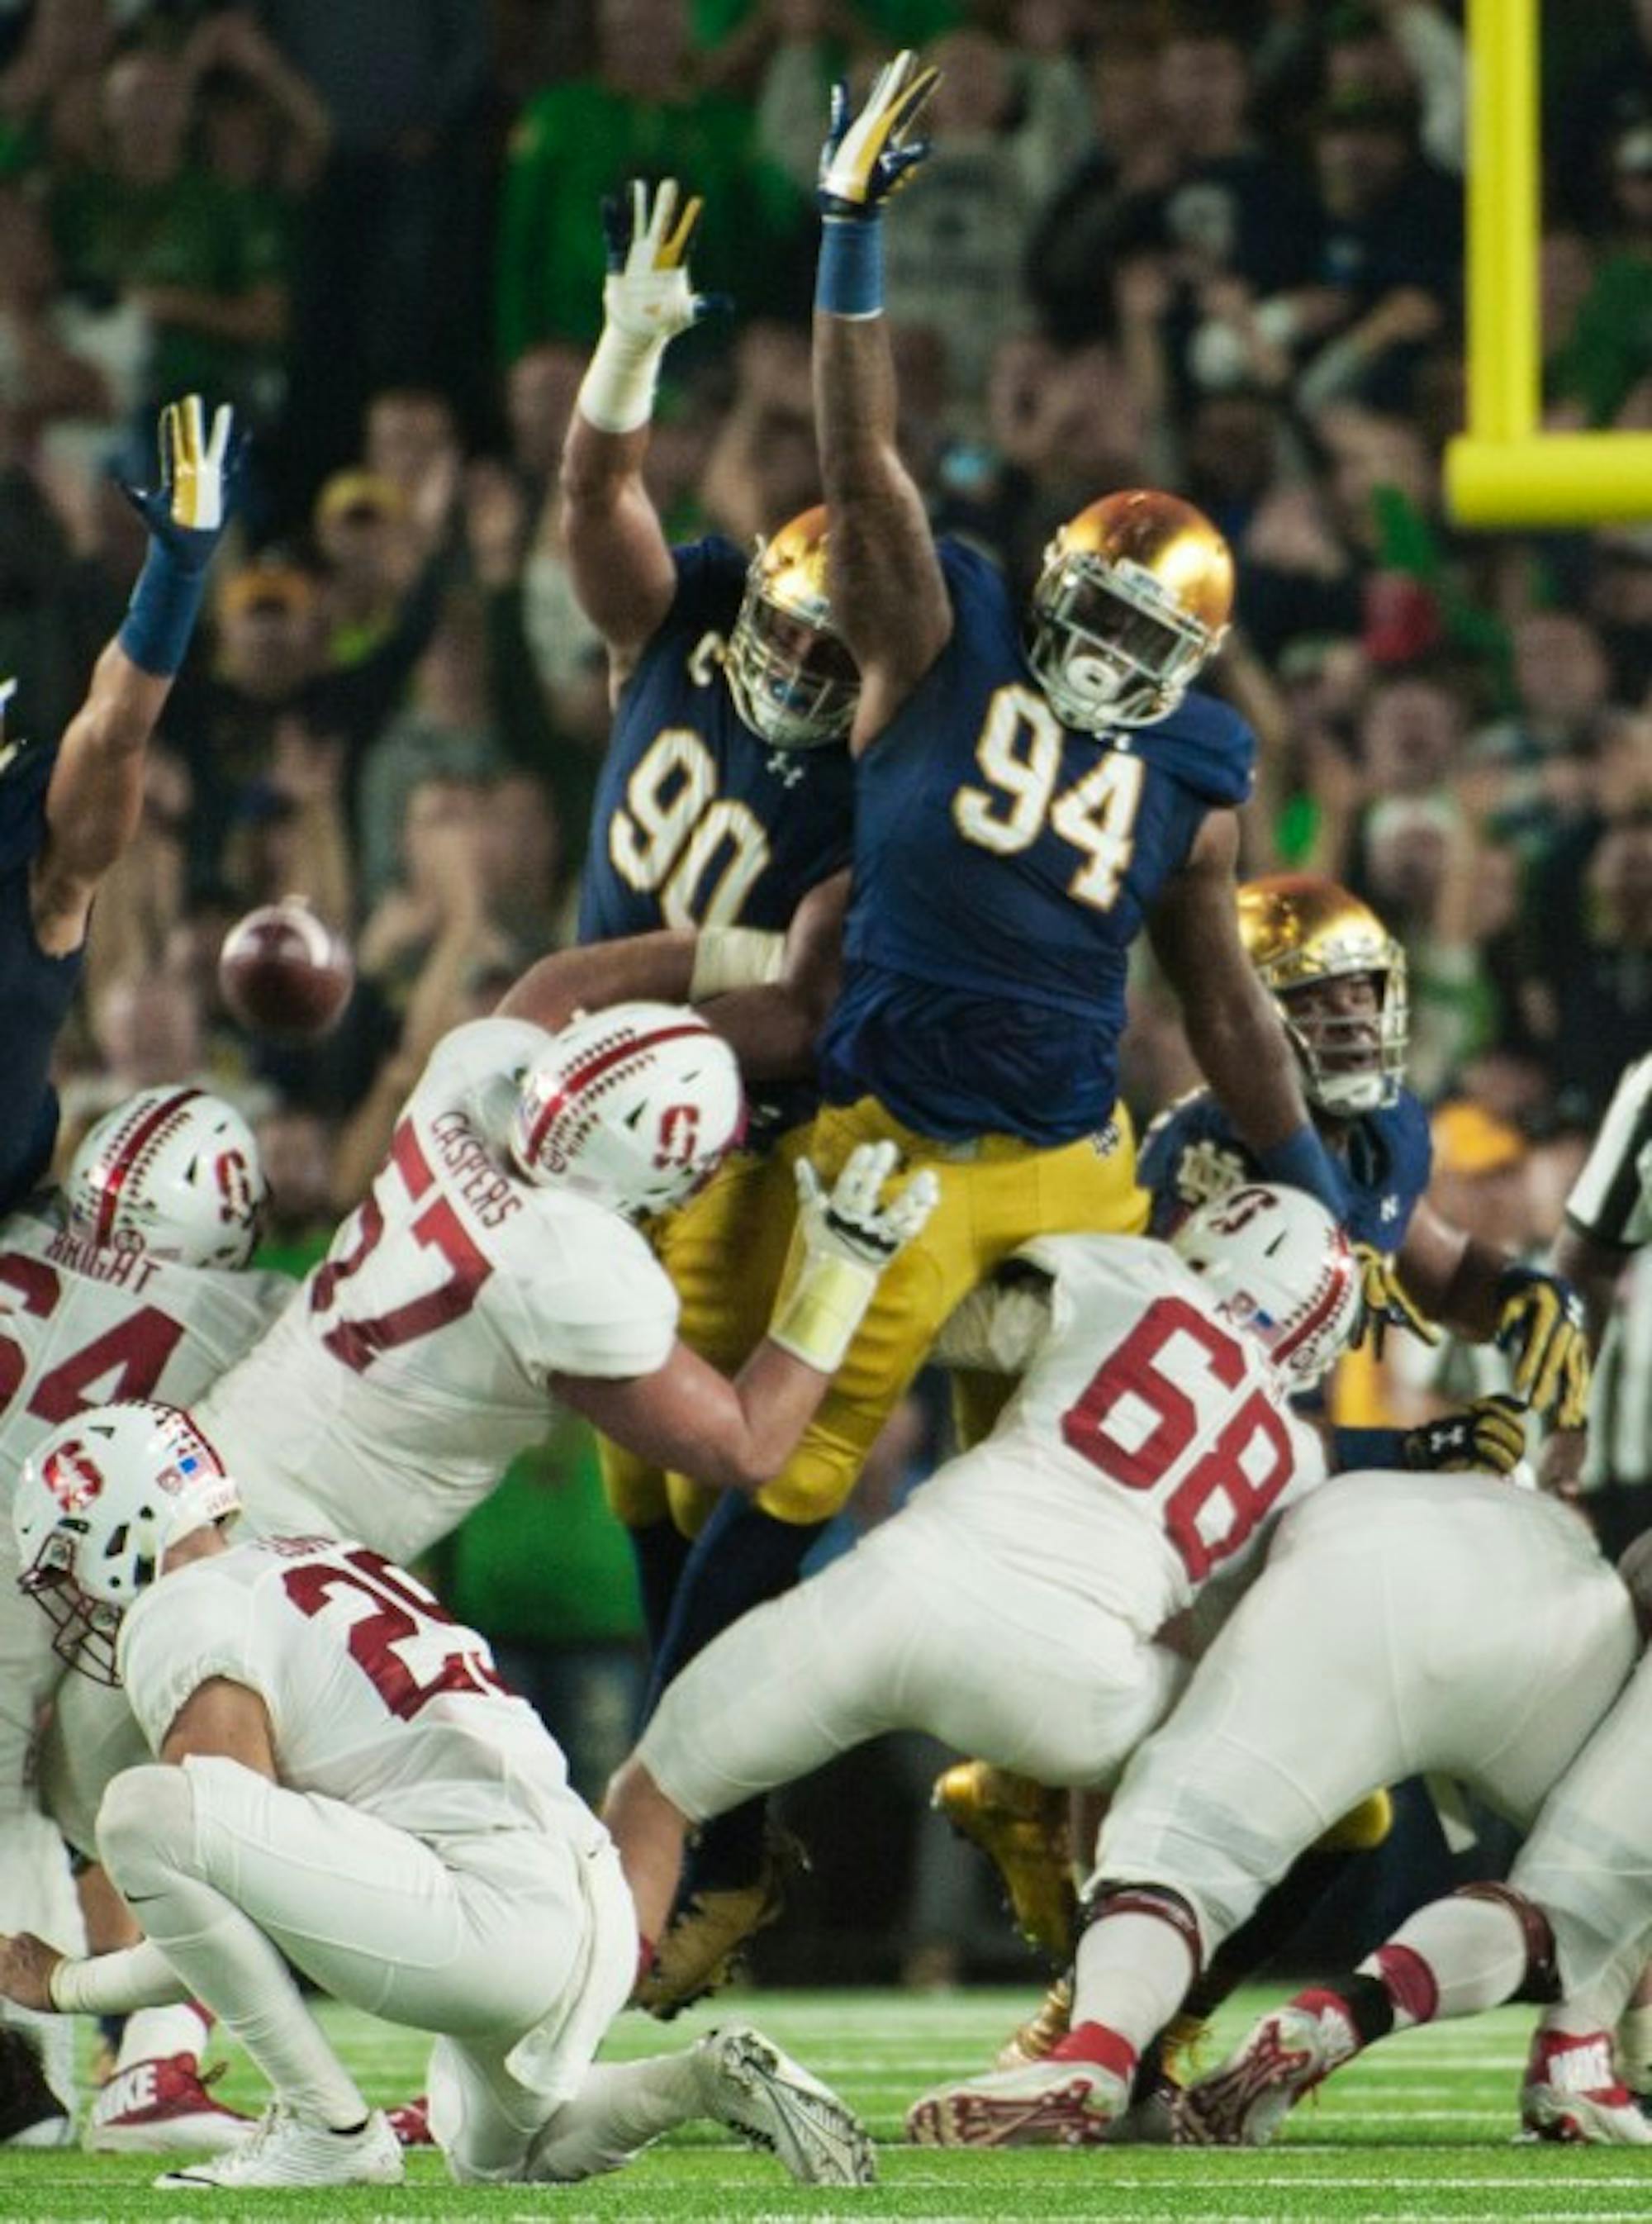 Irish graduate student defensive lineman Jarron Jones, 94, attempts to block a field goal during Notre Dame's 17-10 loss to Stanford on Oct. 15 at Notre Dame Stadium.